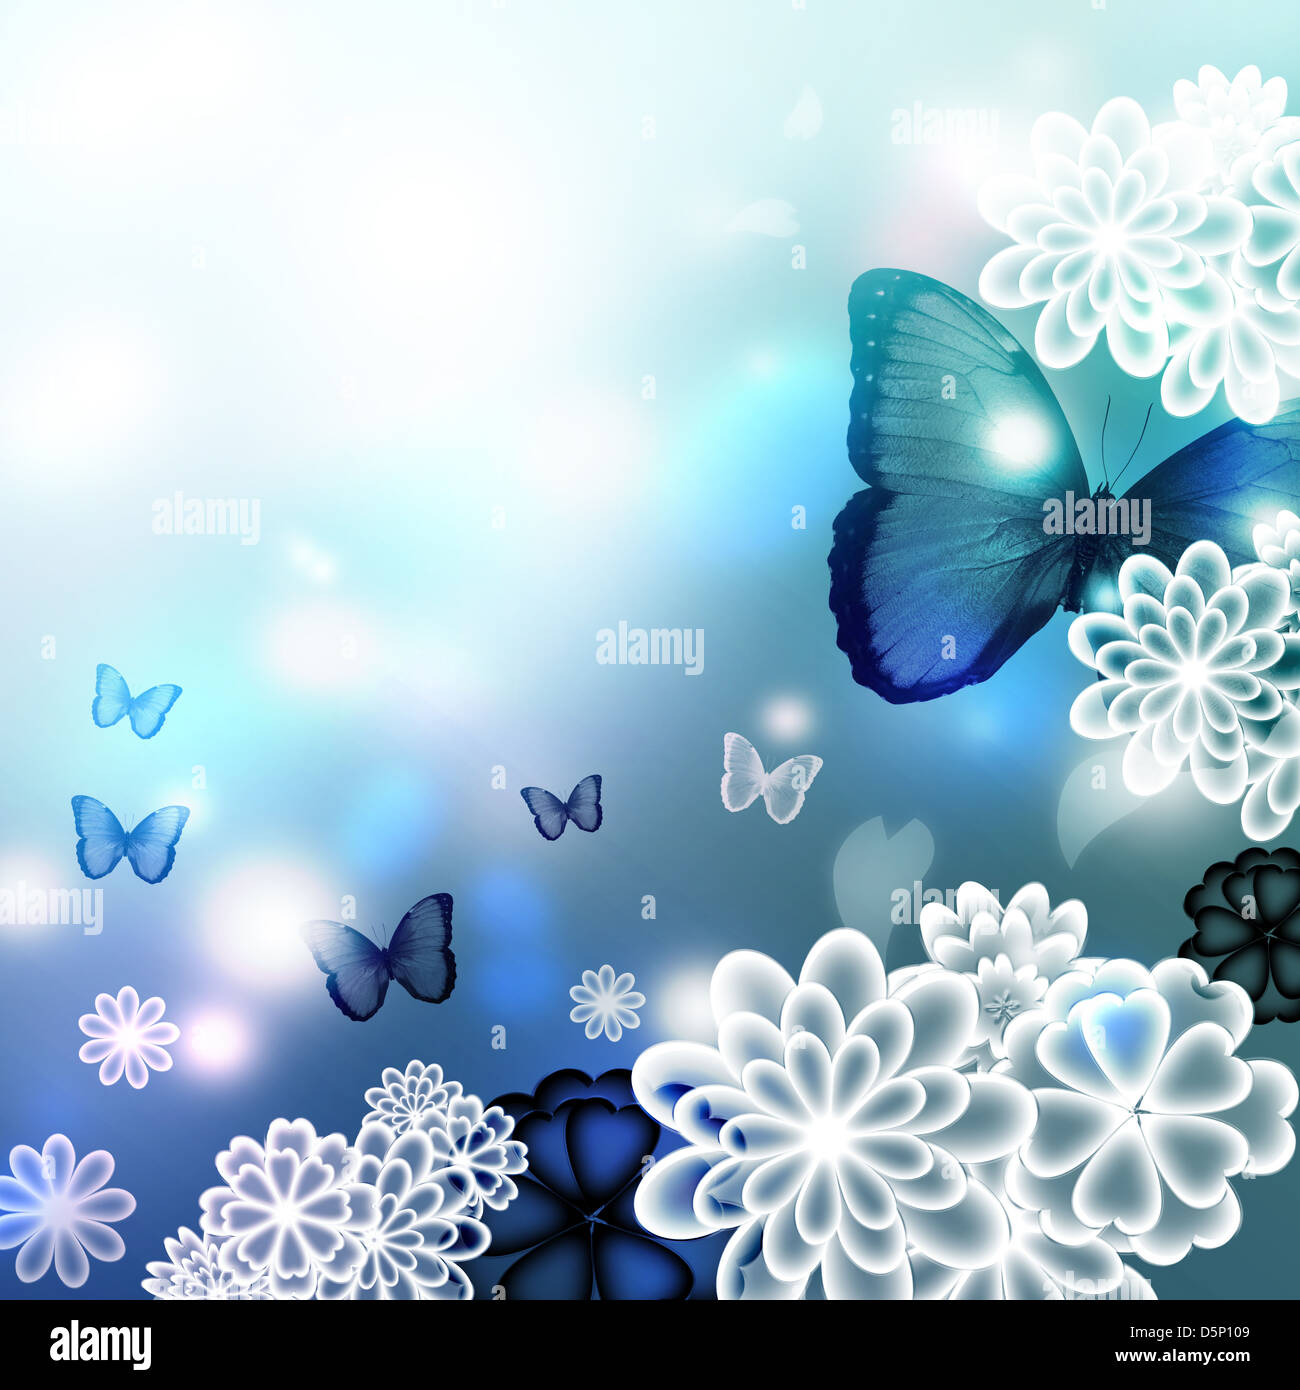 Blossoms and butterflies, blue colored illustration Stock Photo